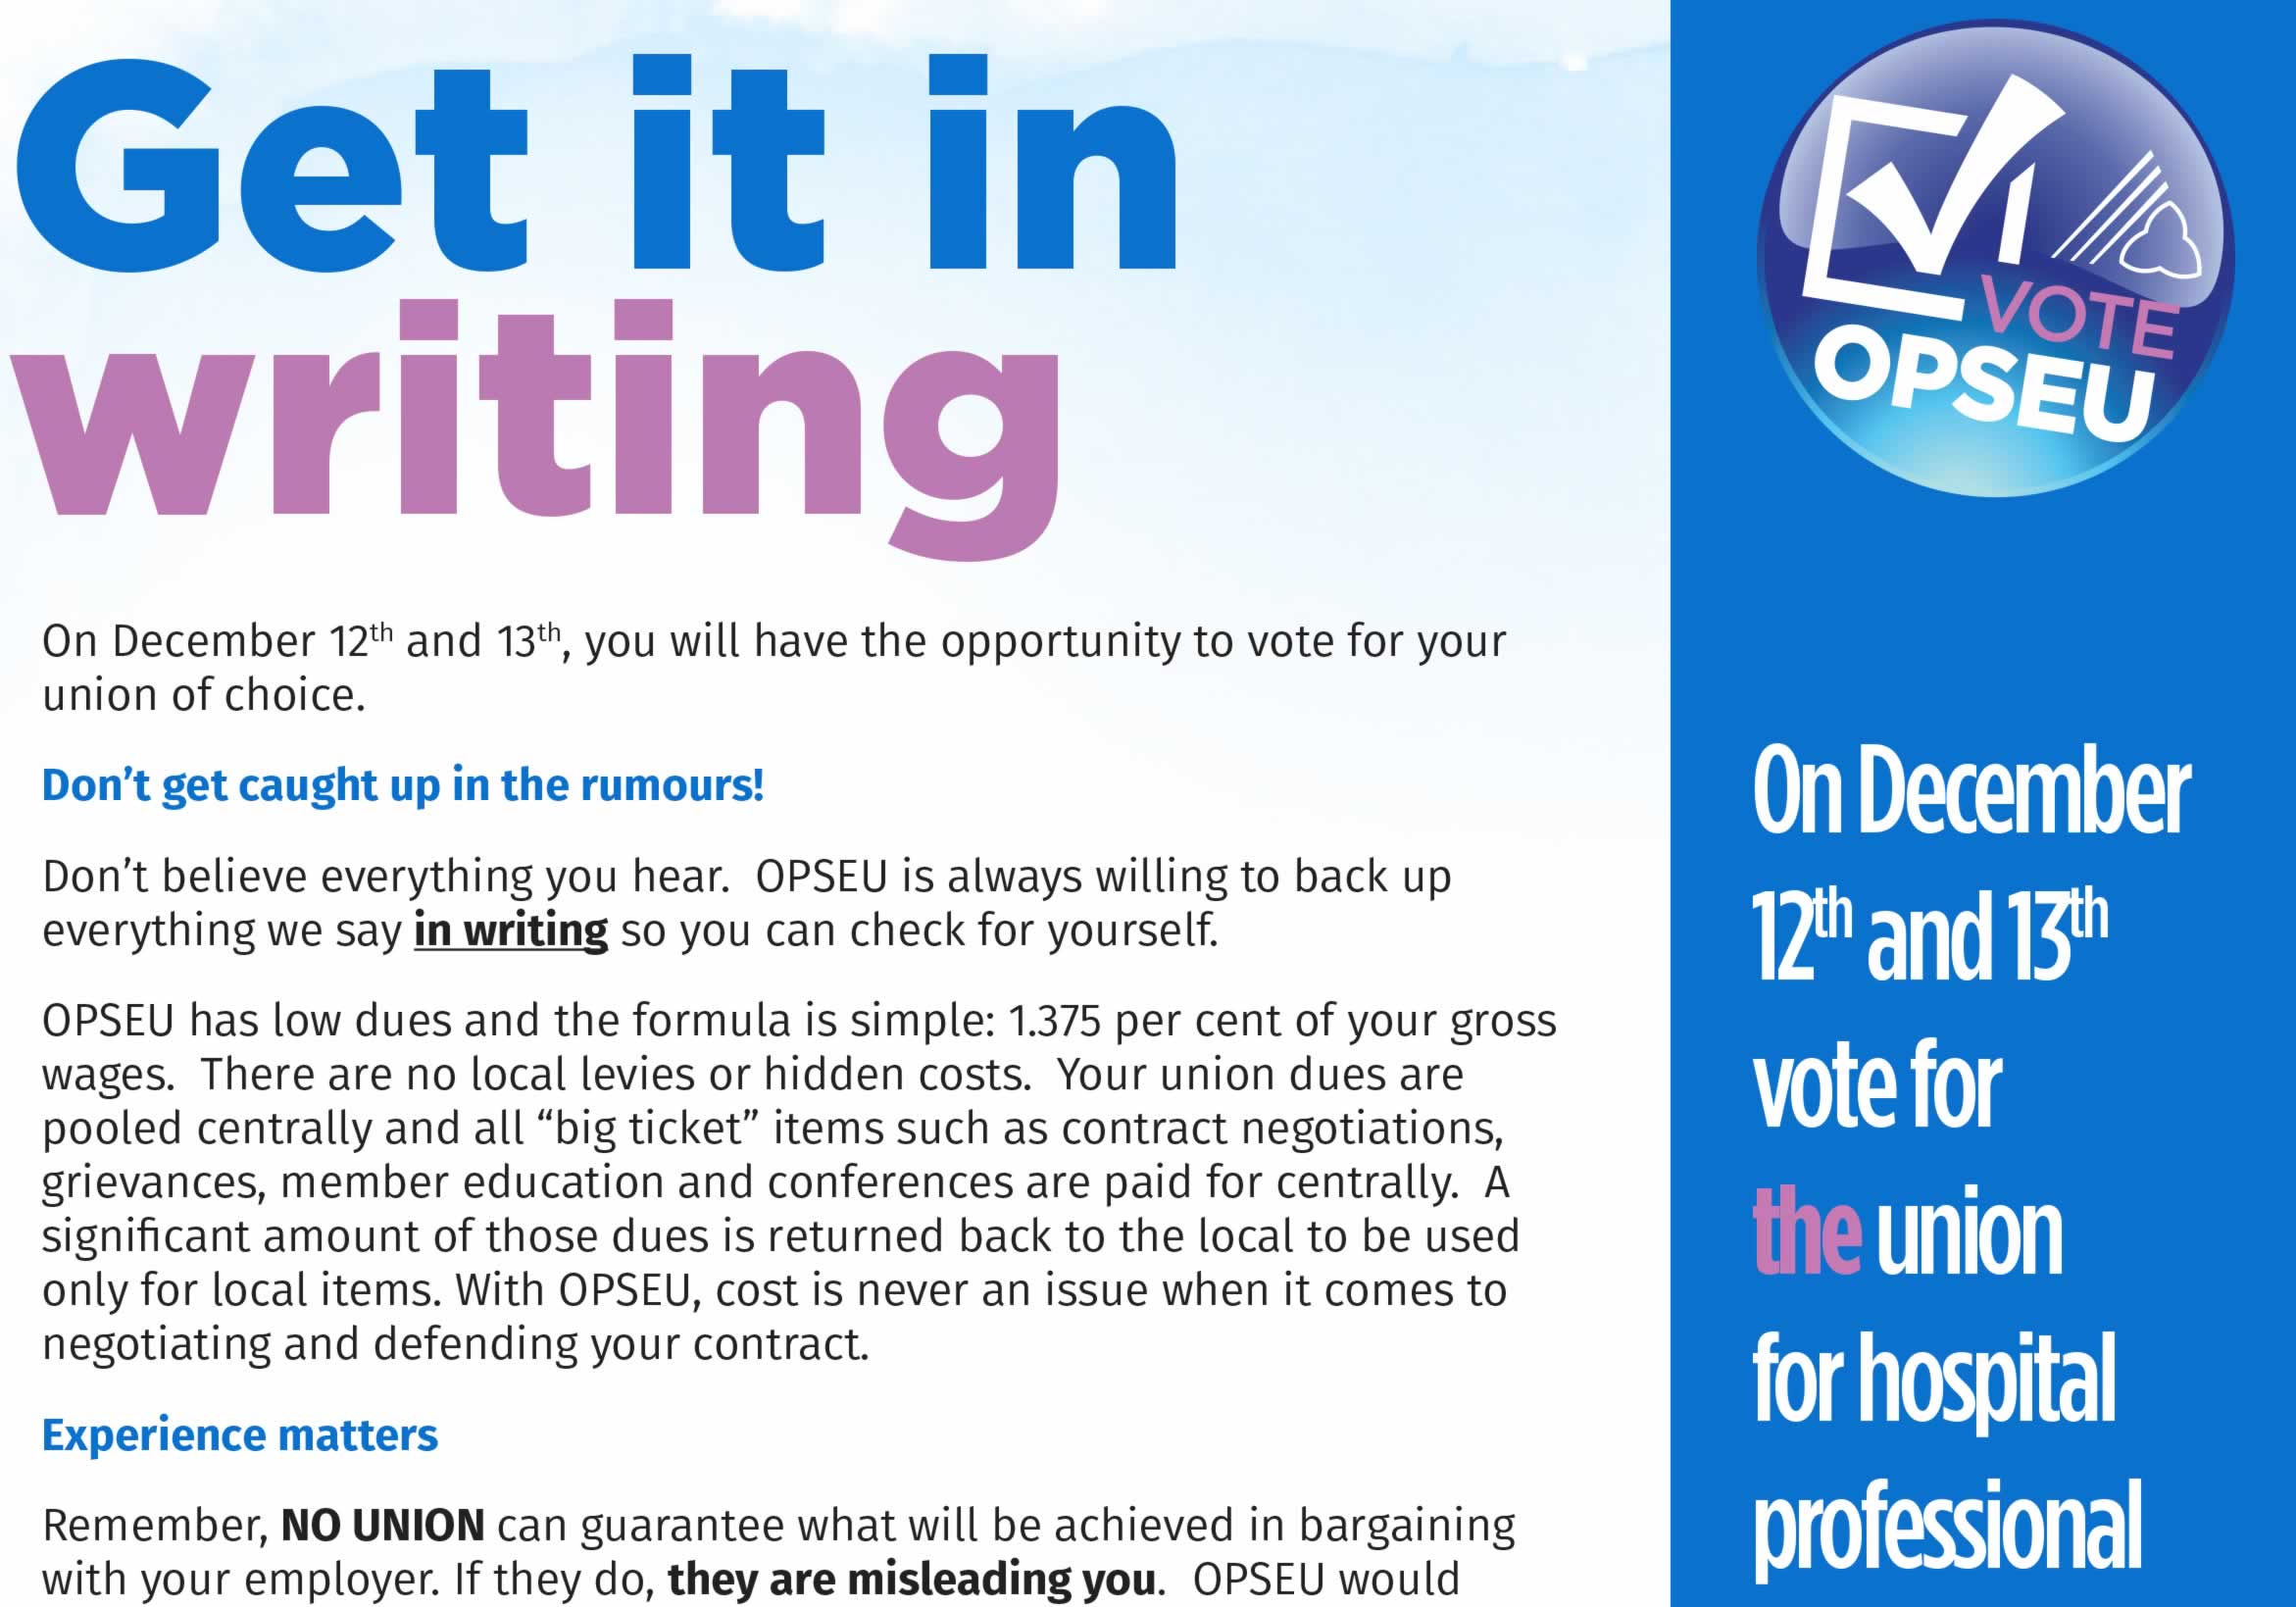 Get it in writing. Vote OPSEU.